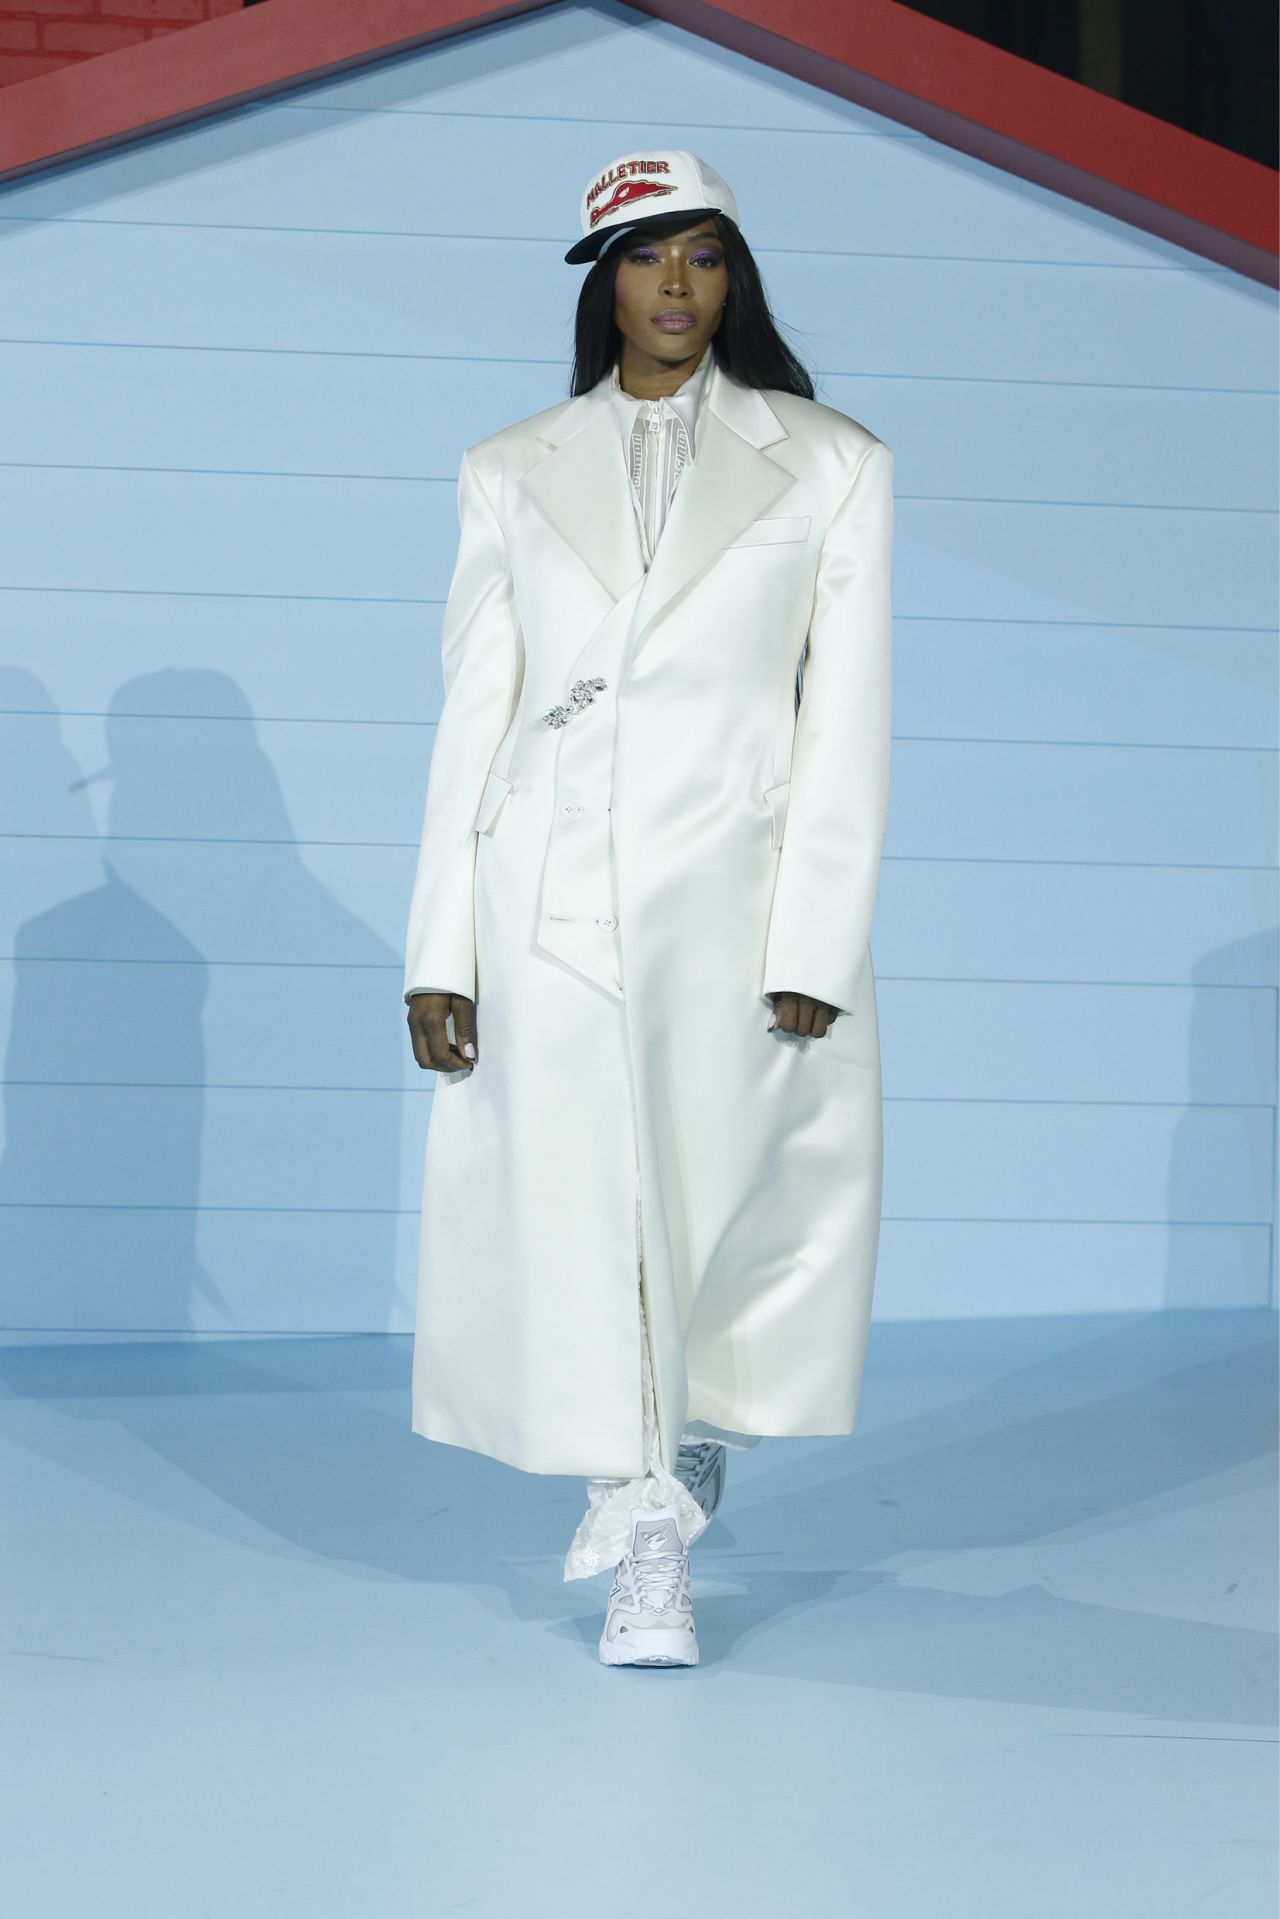 Naomi Campbell, a friend and collaborator of Virgil Abloh, closes the Louis Vuitton show at Paris Fashion Week.